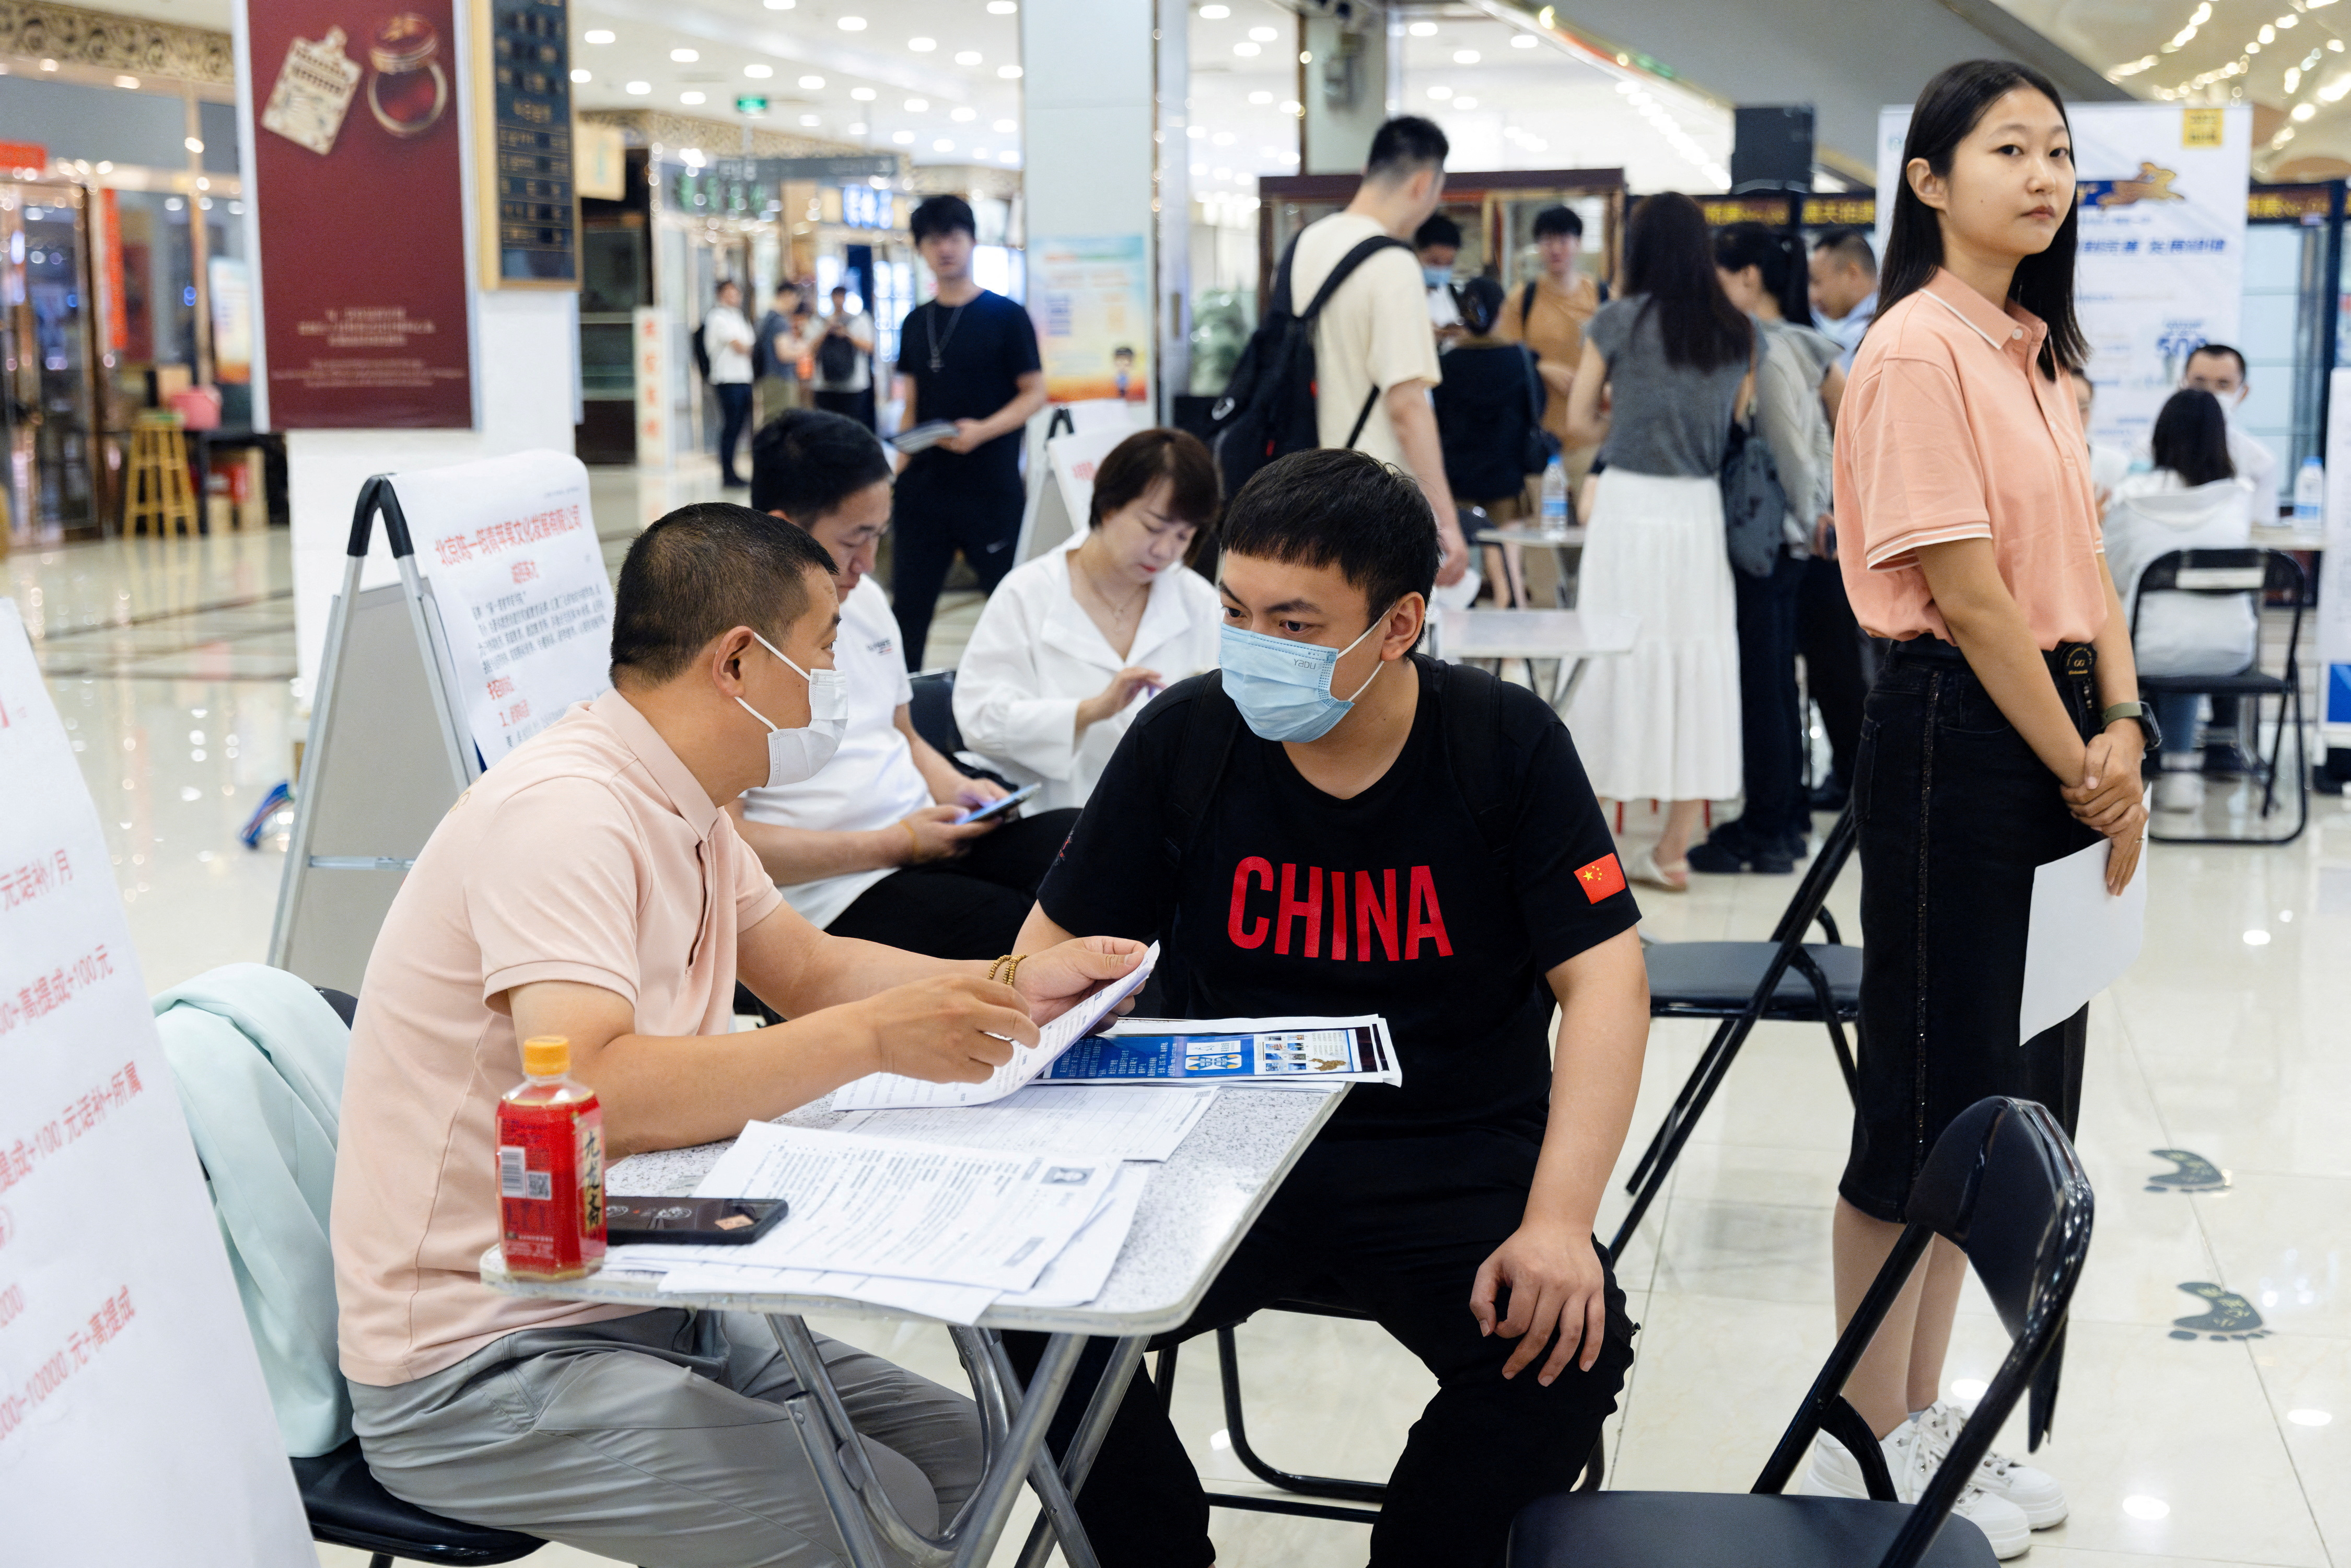 People attend a job fair in a mall in Beijing